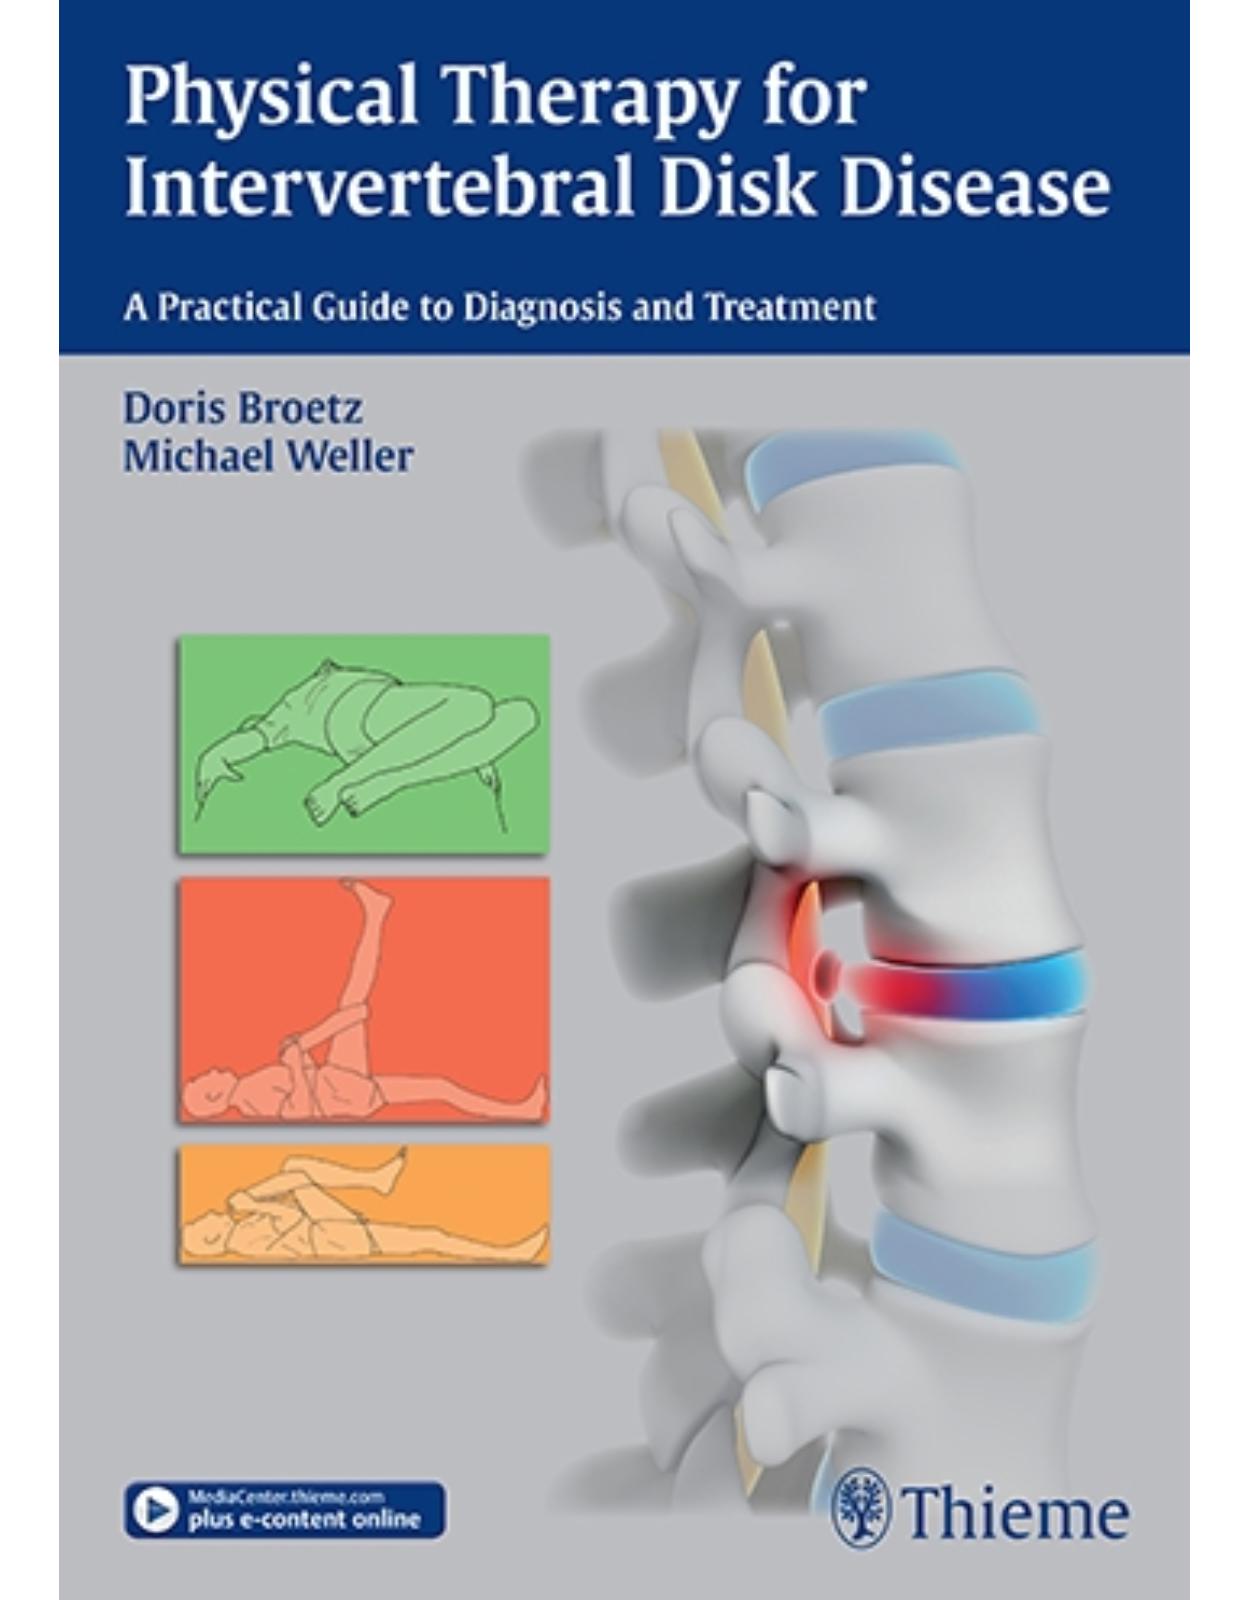 Physical Therapy for Intervertebral Disk Disease: A Practical Guide to Diagnosis and Treatment